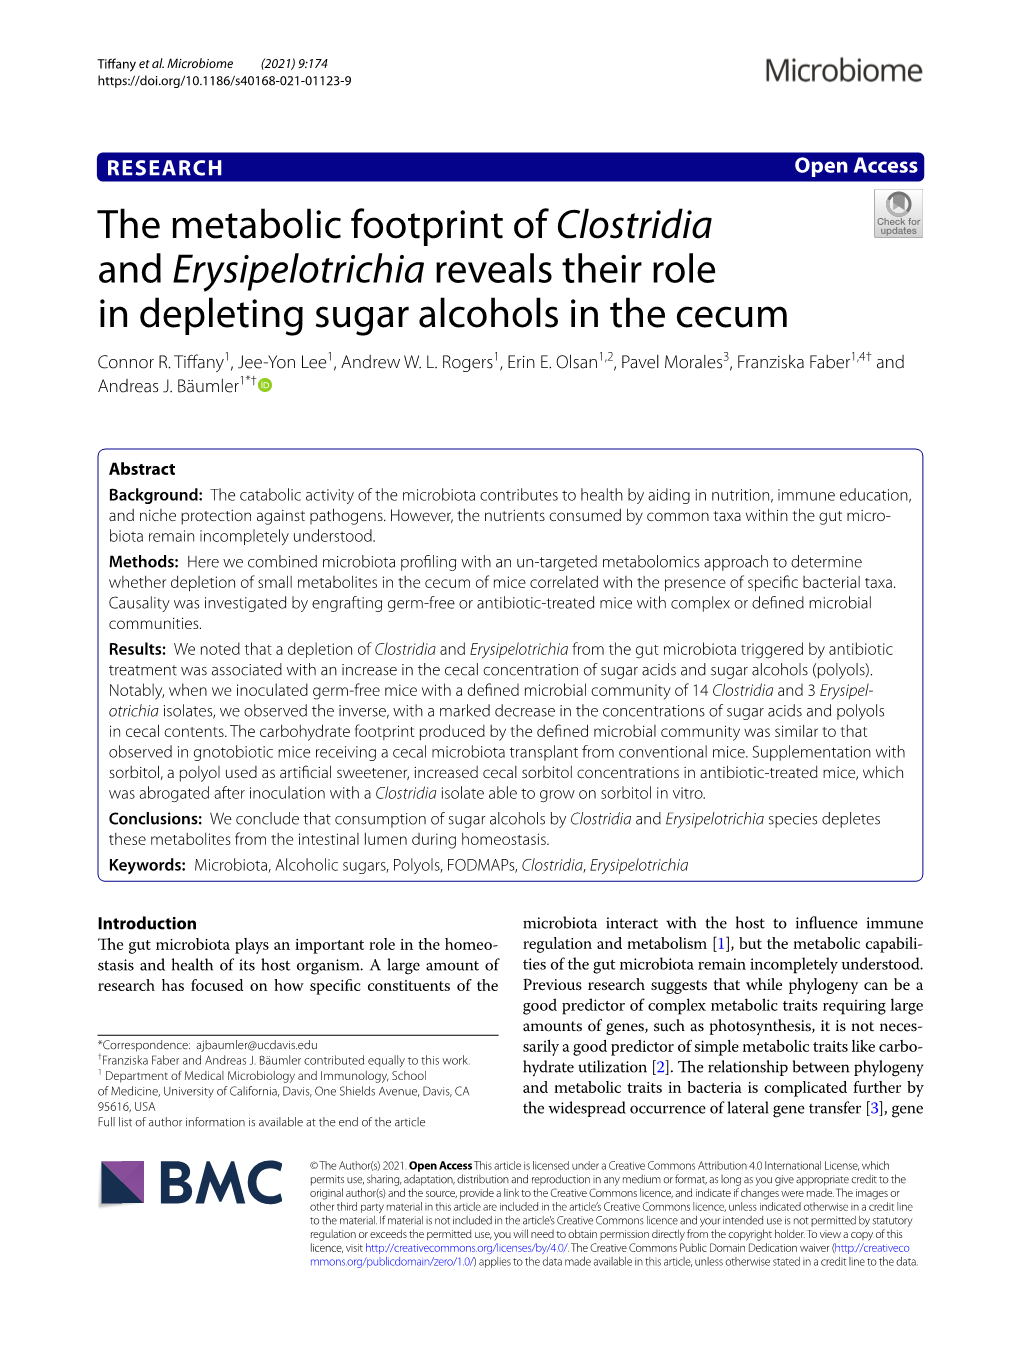 The Metabolic Footprint of Clostridia and Erysipelotrichia Reveals Their Role in Depleting Sugar Alcohols in the Cecum Connor R